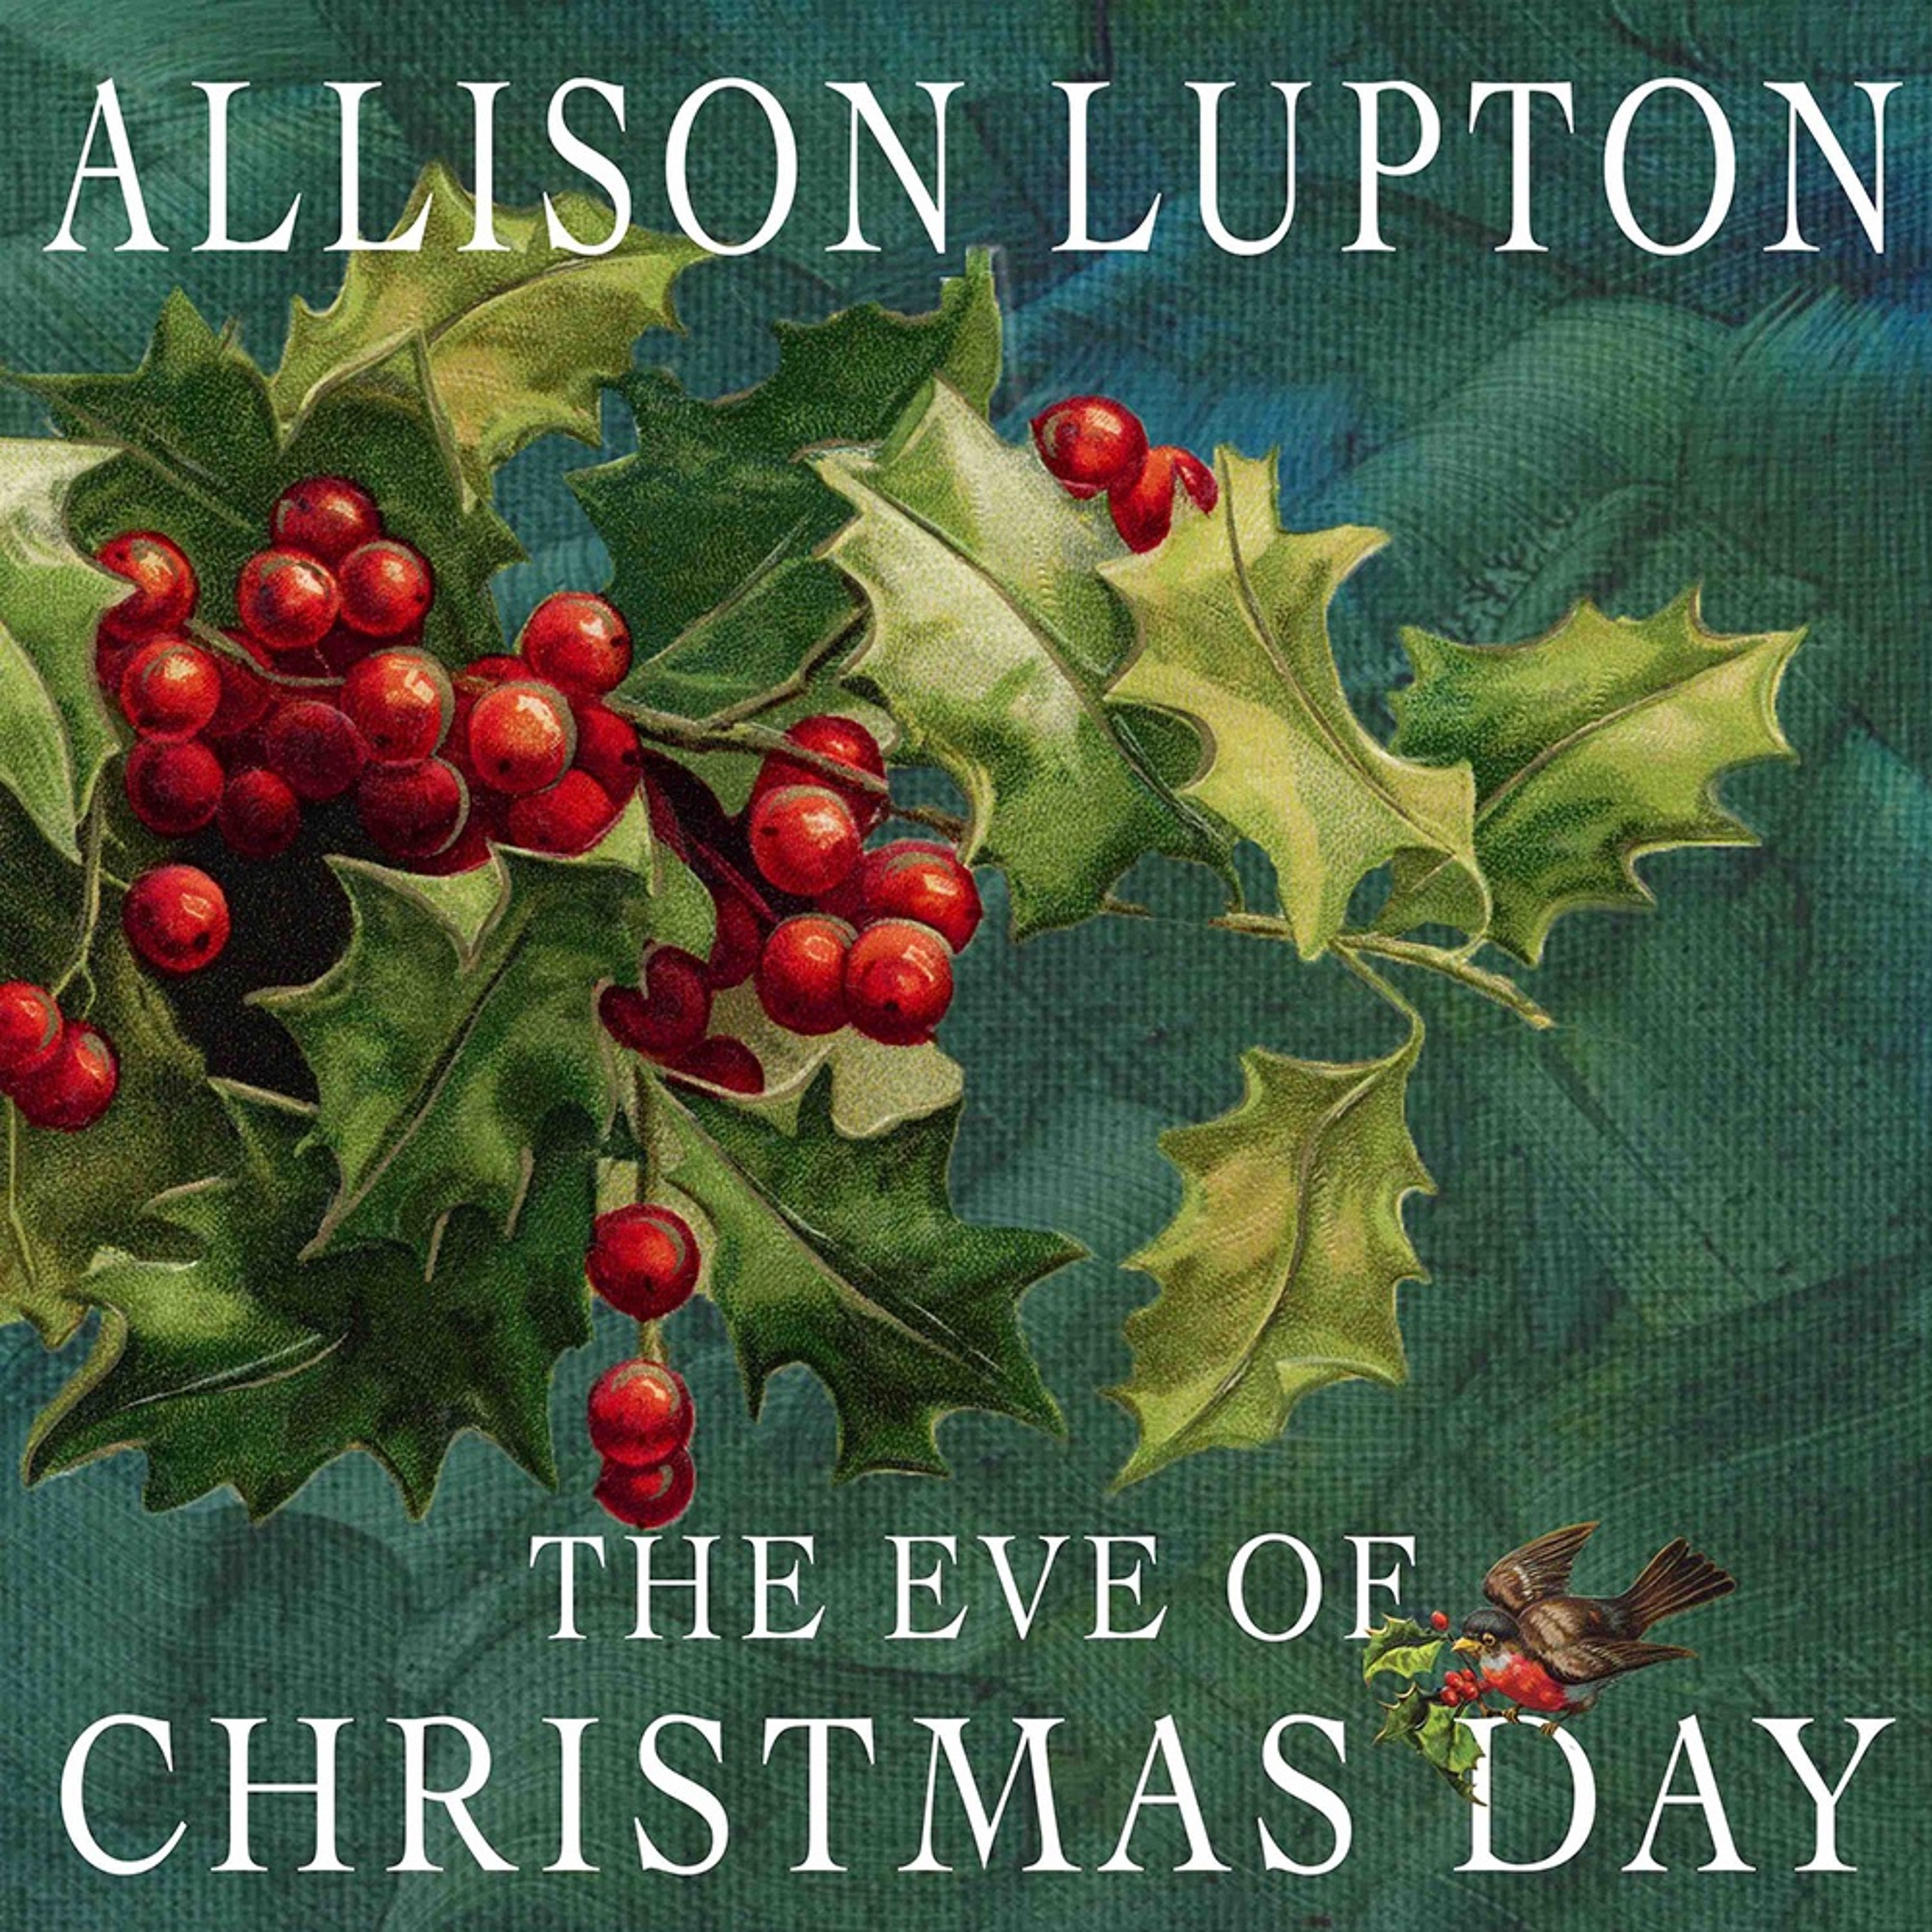 Interview - Allison Lupton discussing her Christmas single 